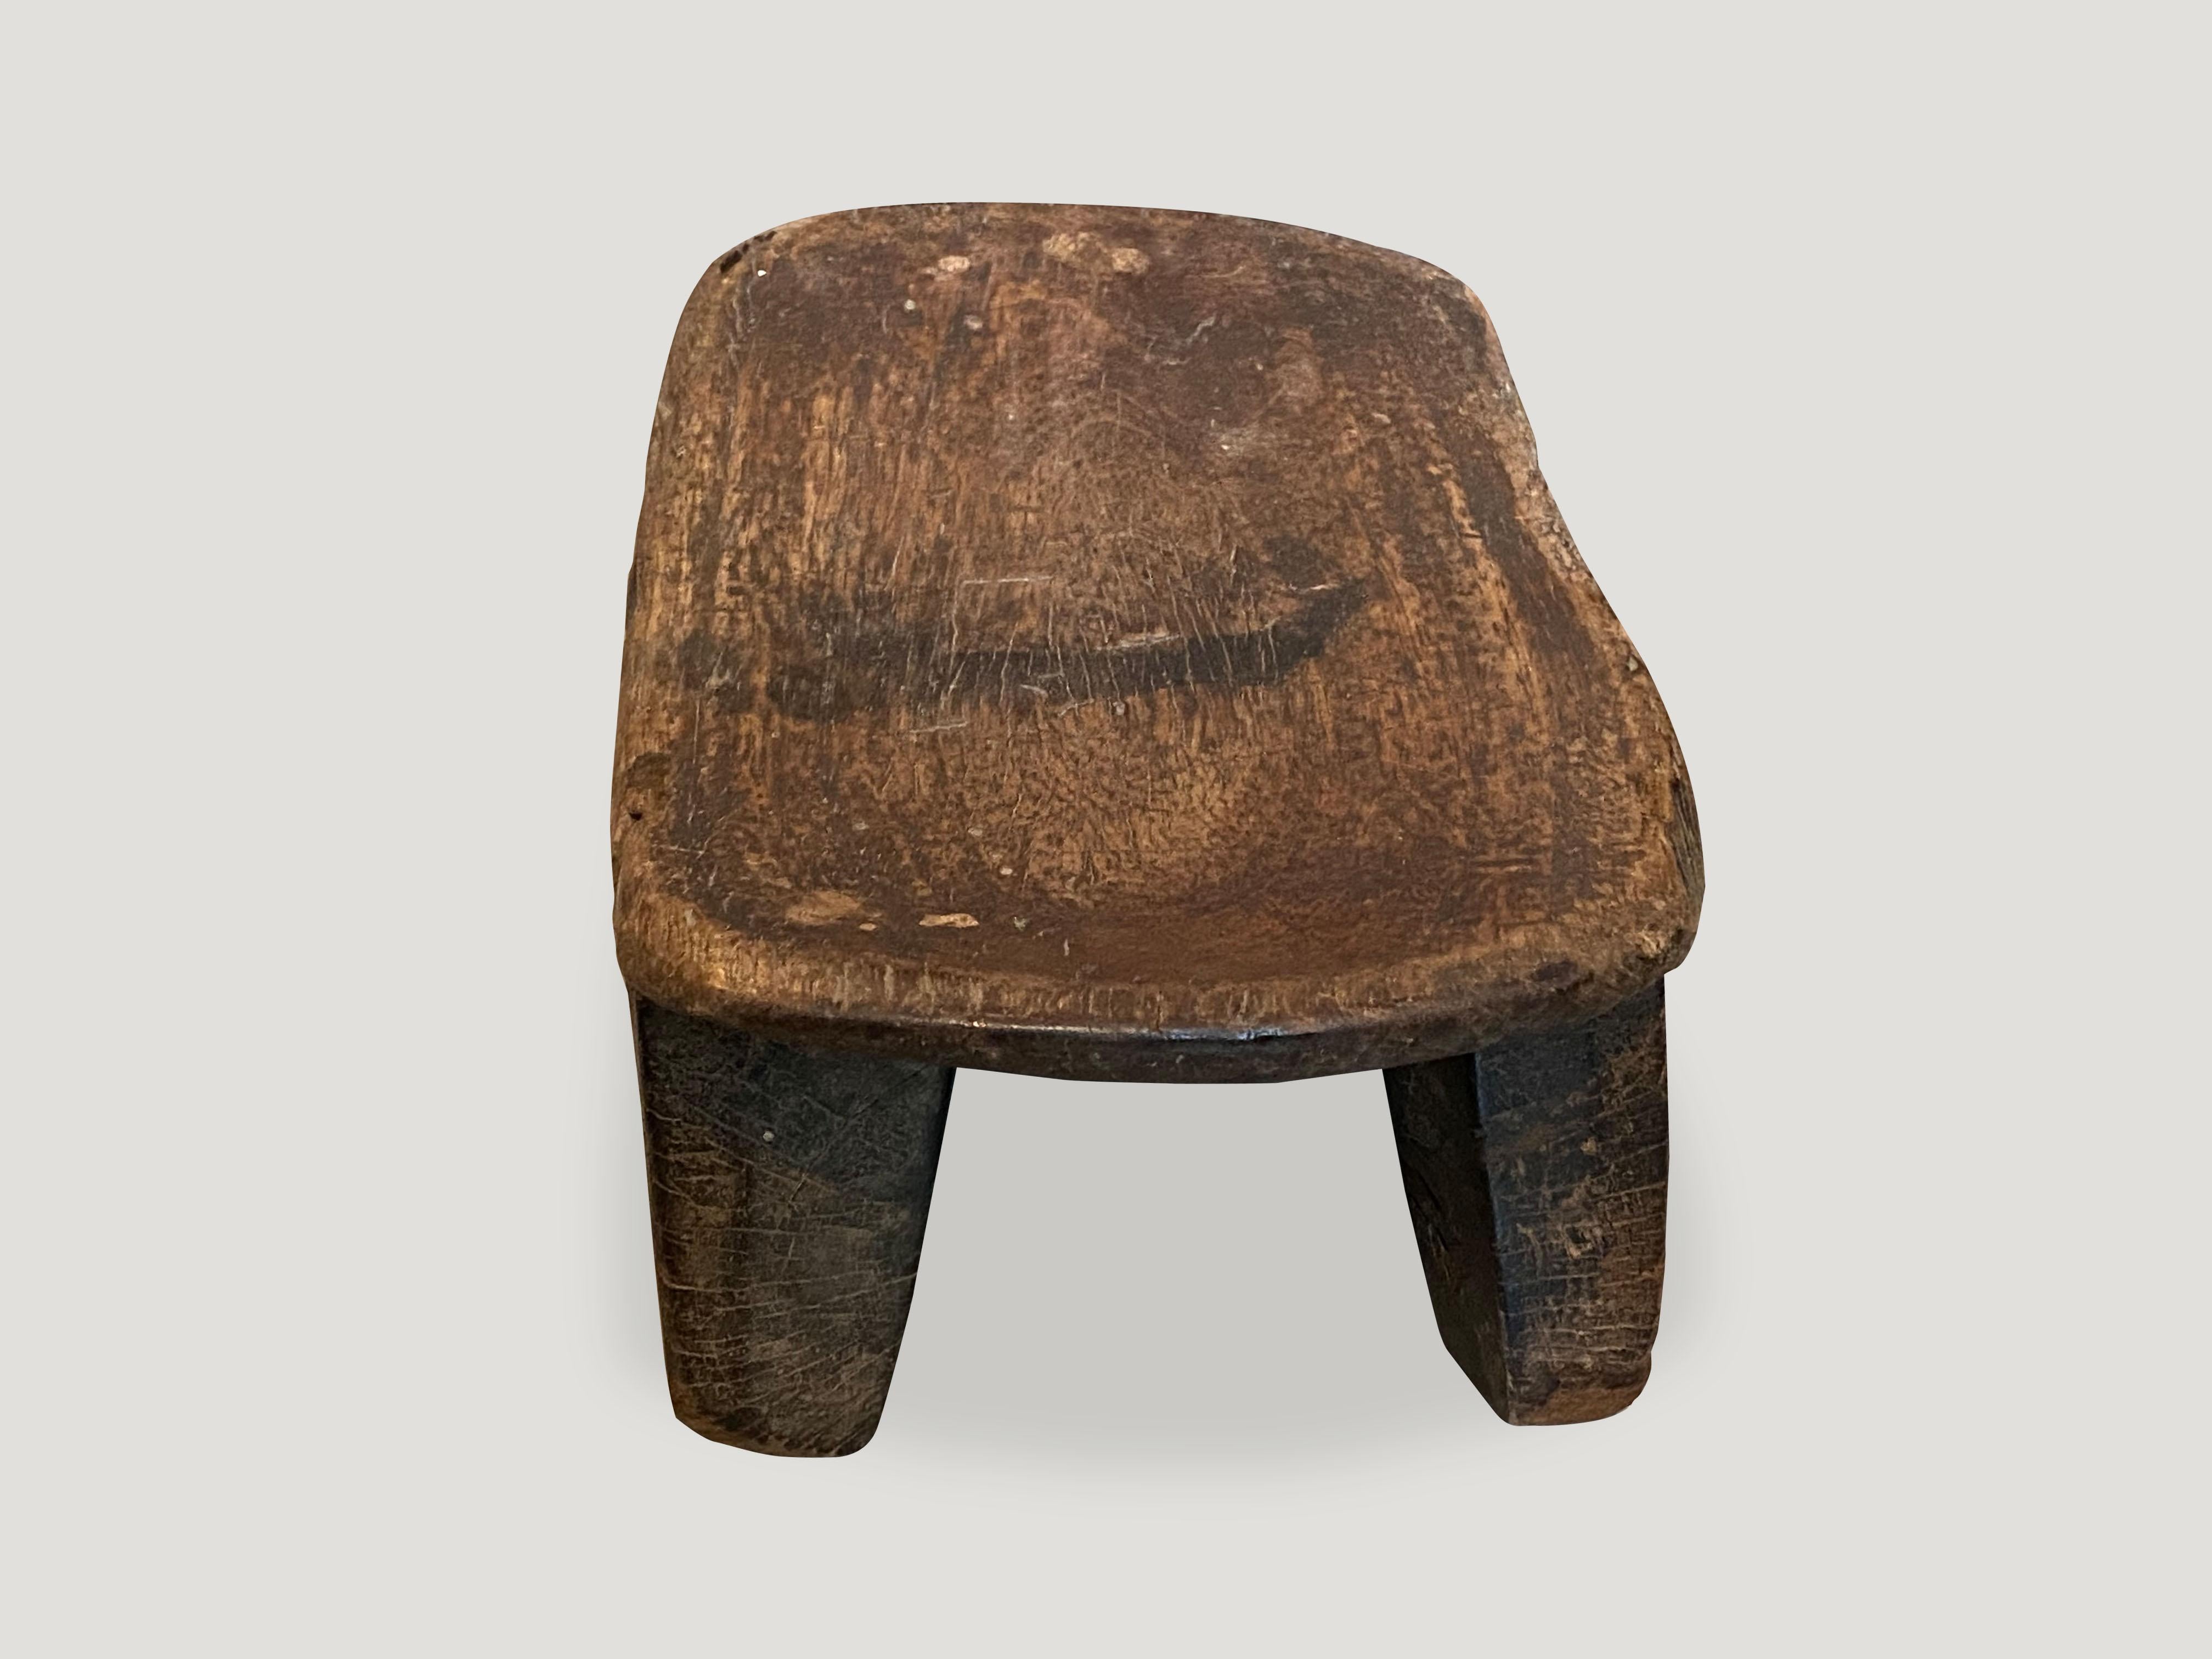 Lovely patina on this beautiful African stool hand carved from a single block of wood. Great for placing a book or perhaps towels in a bathroom, magazines etc.

This stool was sourced in the spirit of wabi-sabi, a Japanese philosophy that beauty